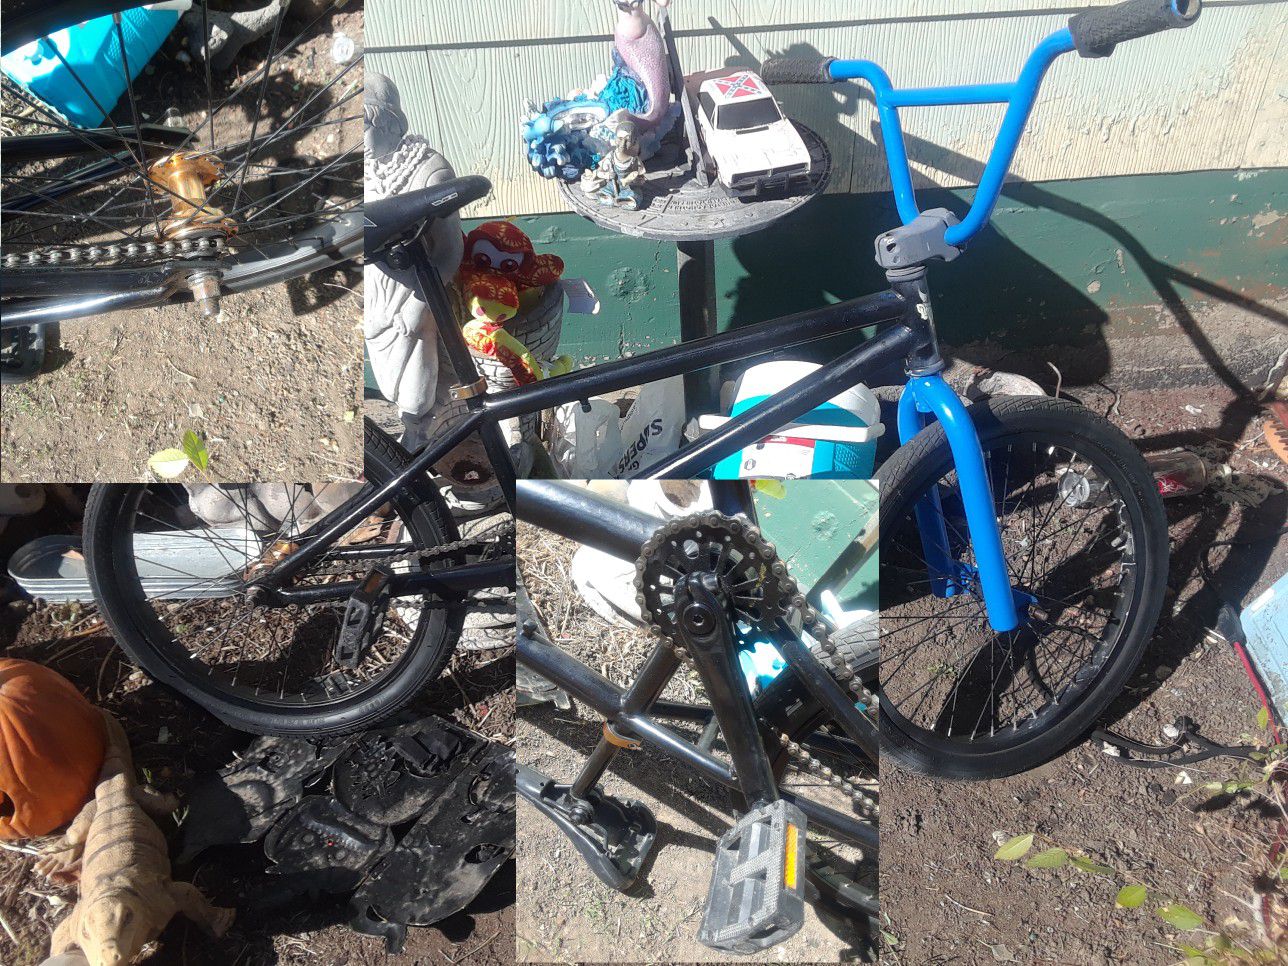 One complete BMX& Two unfinished bmx bikes one a dyno the other a diamondback joker